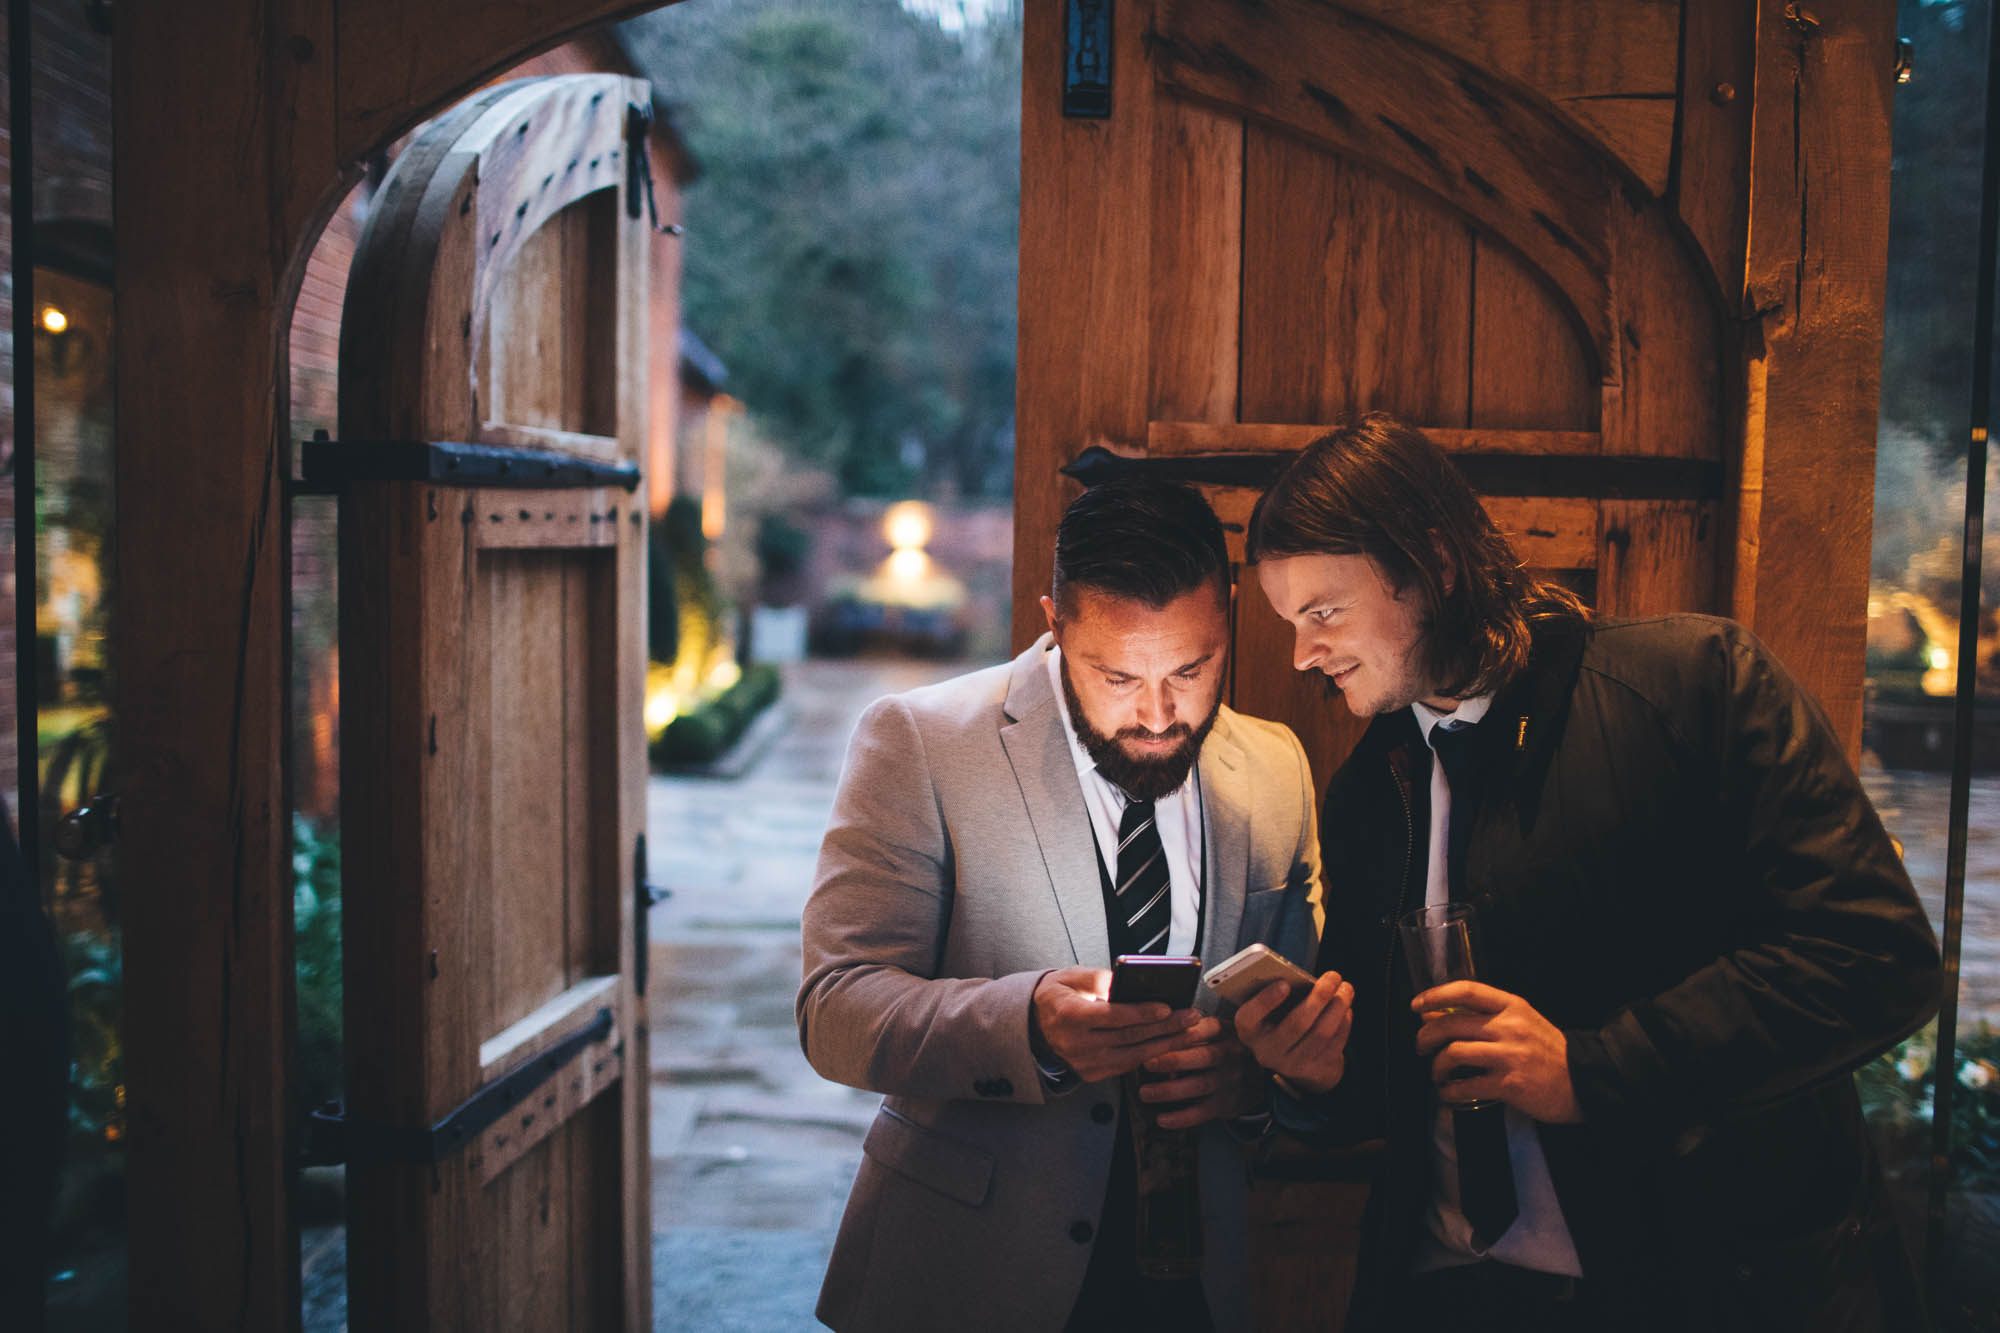 Wedding guests show each other photos on phone in rustic wooden doorway